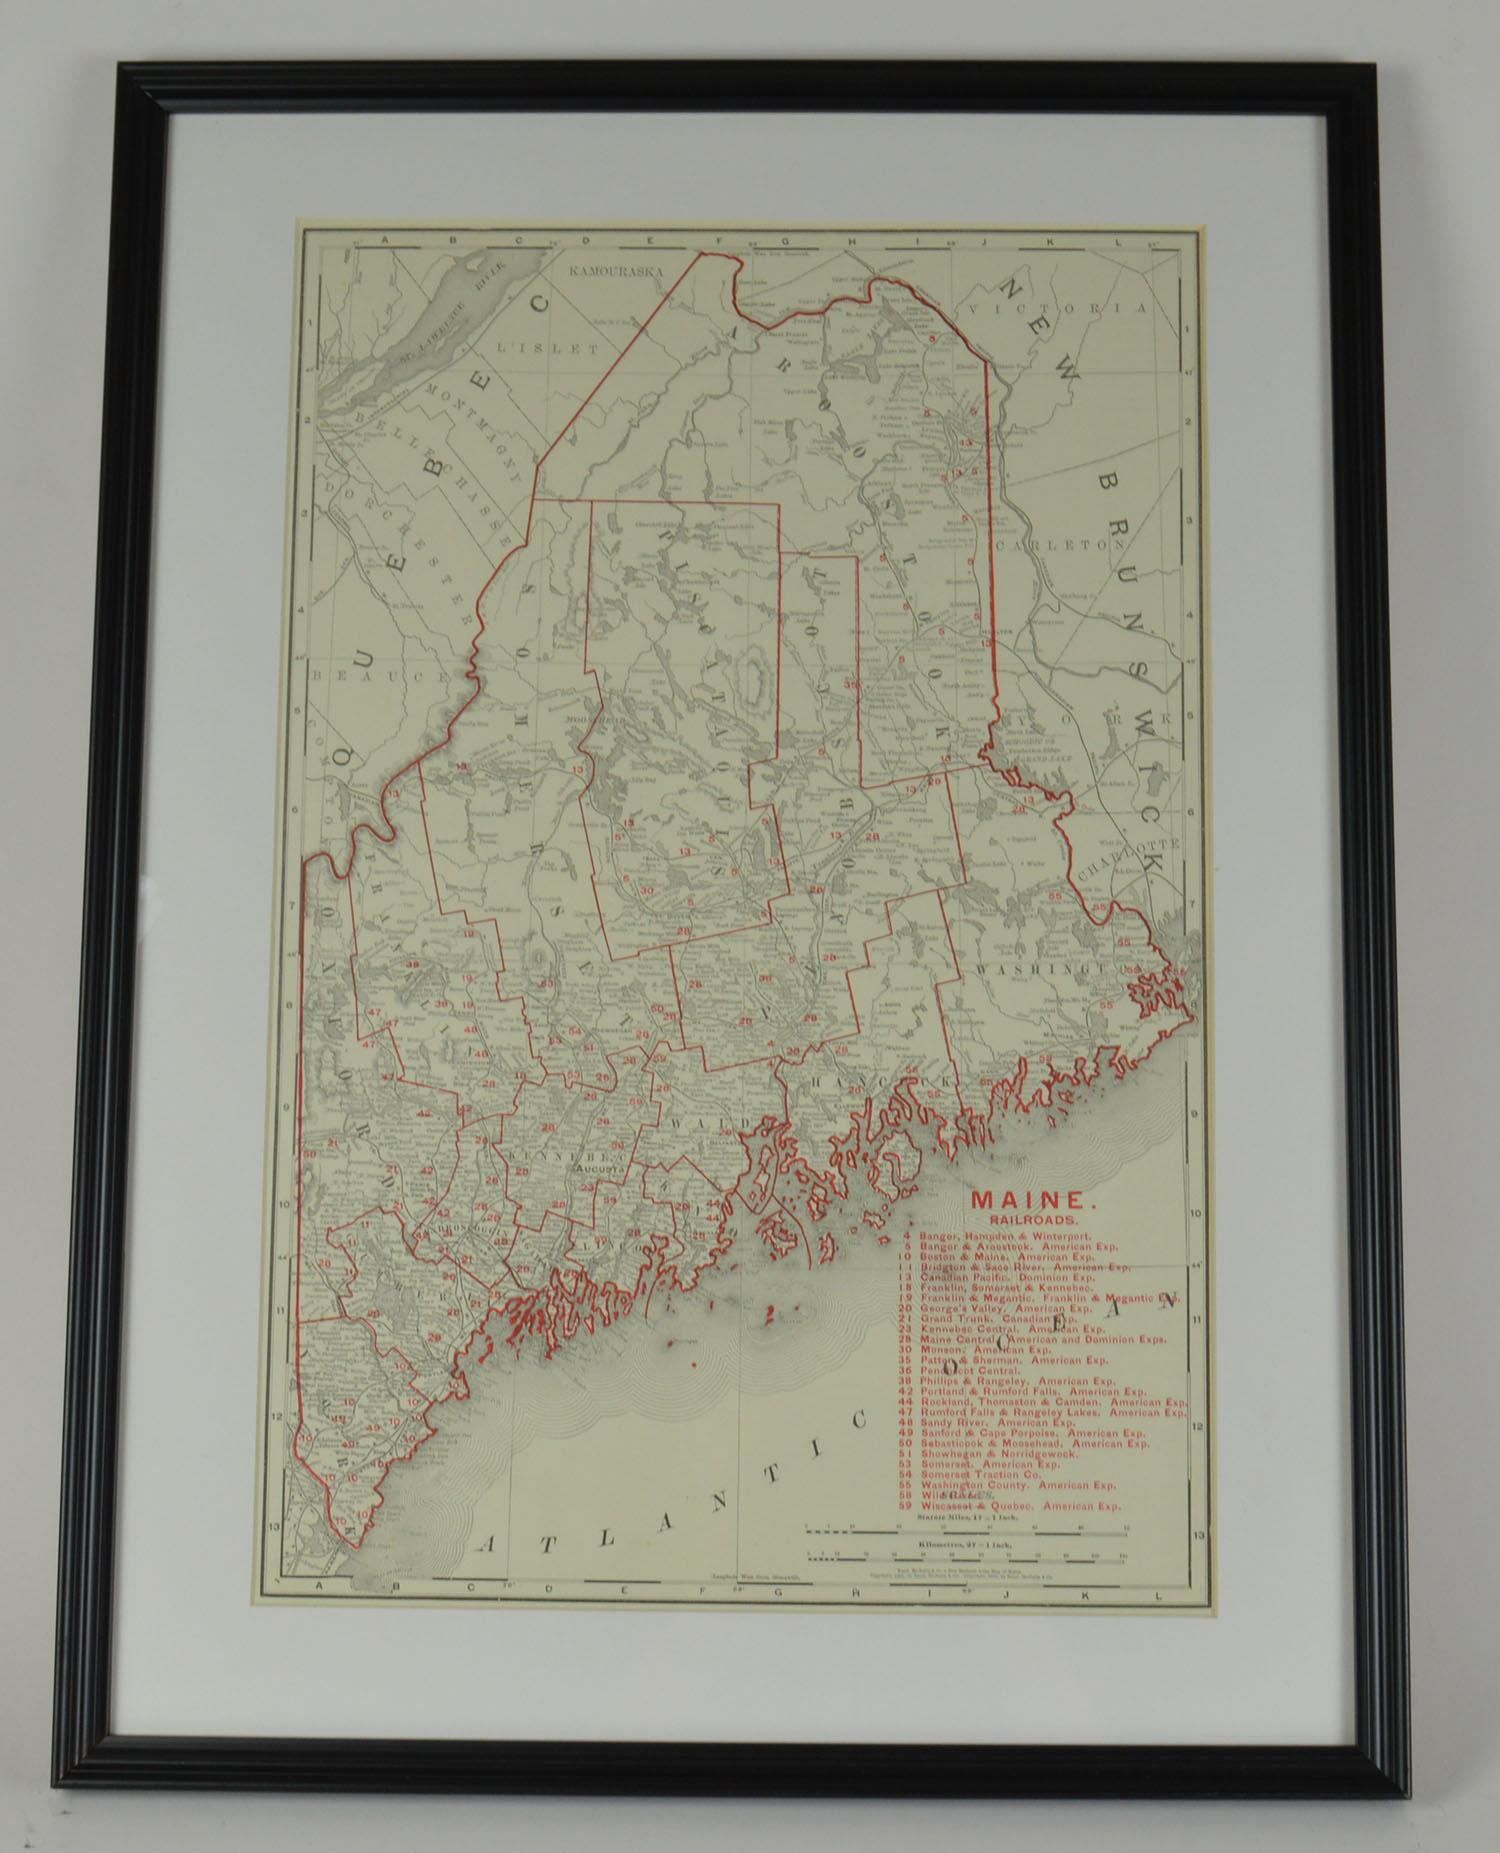 Wonderful set of 6 vintage maps.

Random American States including Maine, Utah, New Hampshire, Nevada, Vermont and New Mexico.

Monochrome with red color outline.

Published by Rand, McNally and Co., circa